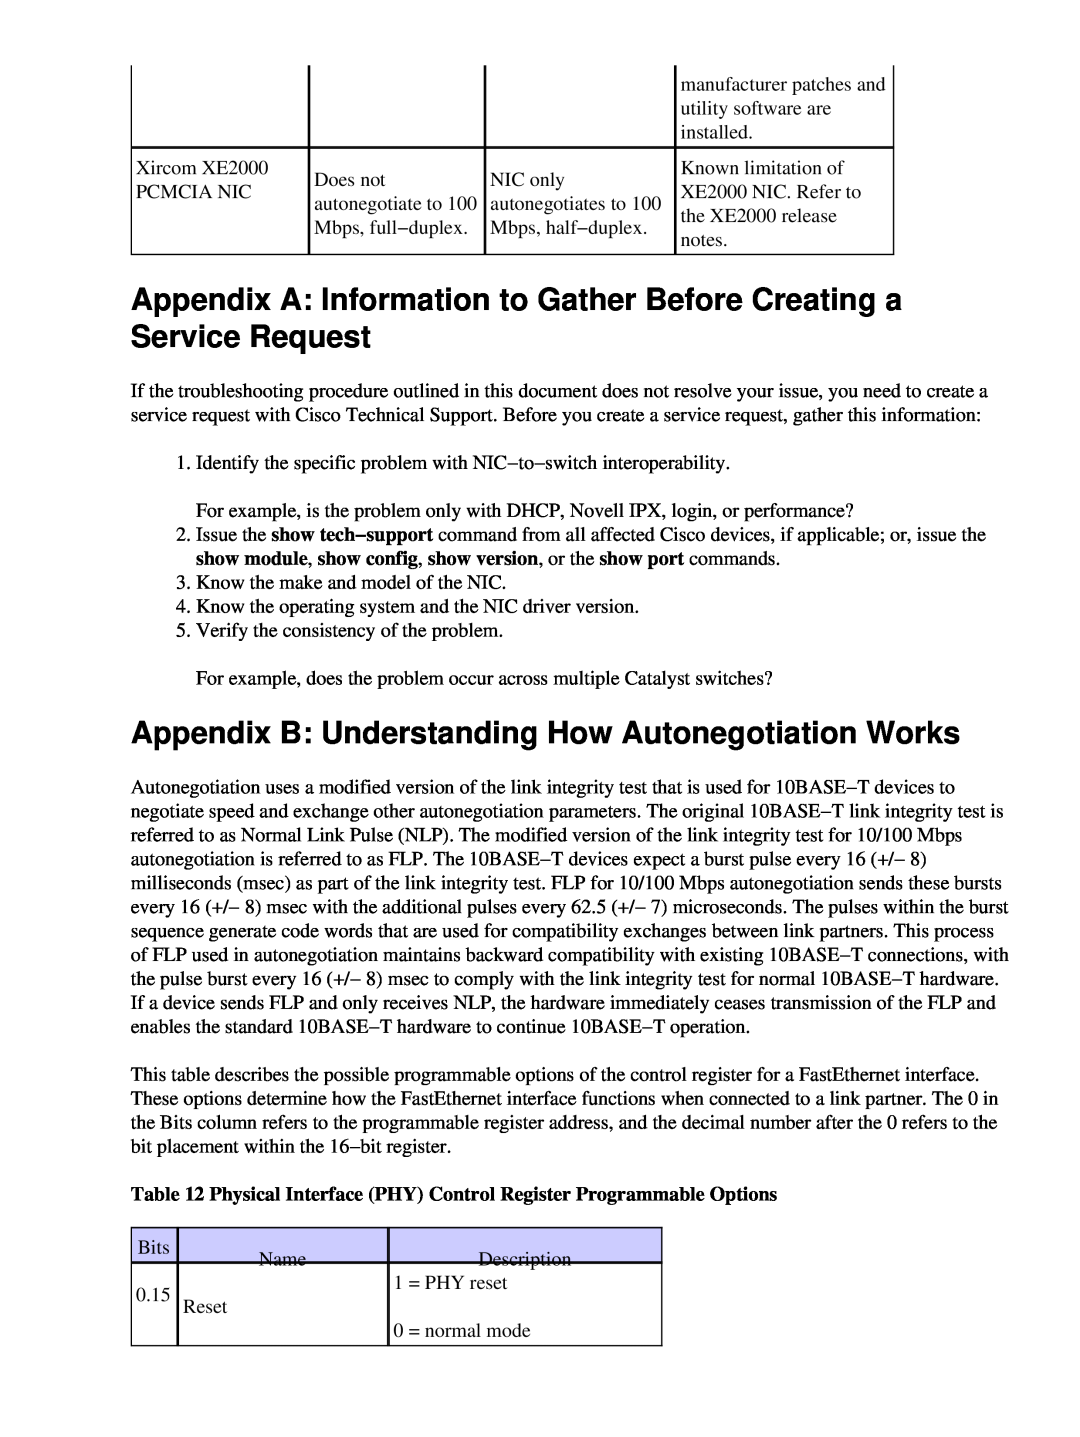 Cisco Systems 17053 appendix Appendix A Information to Gather Before Creating a Service Request 